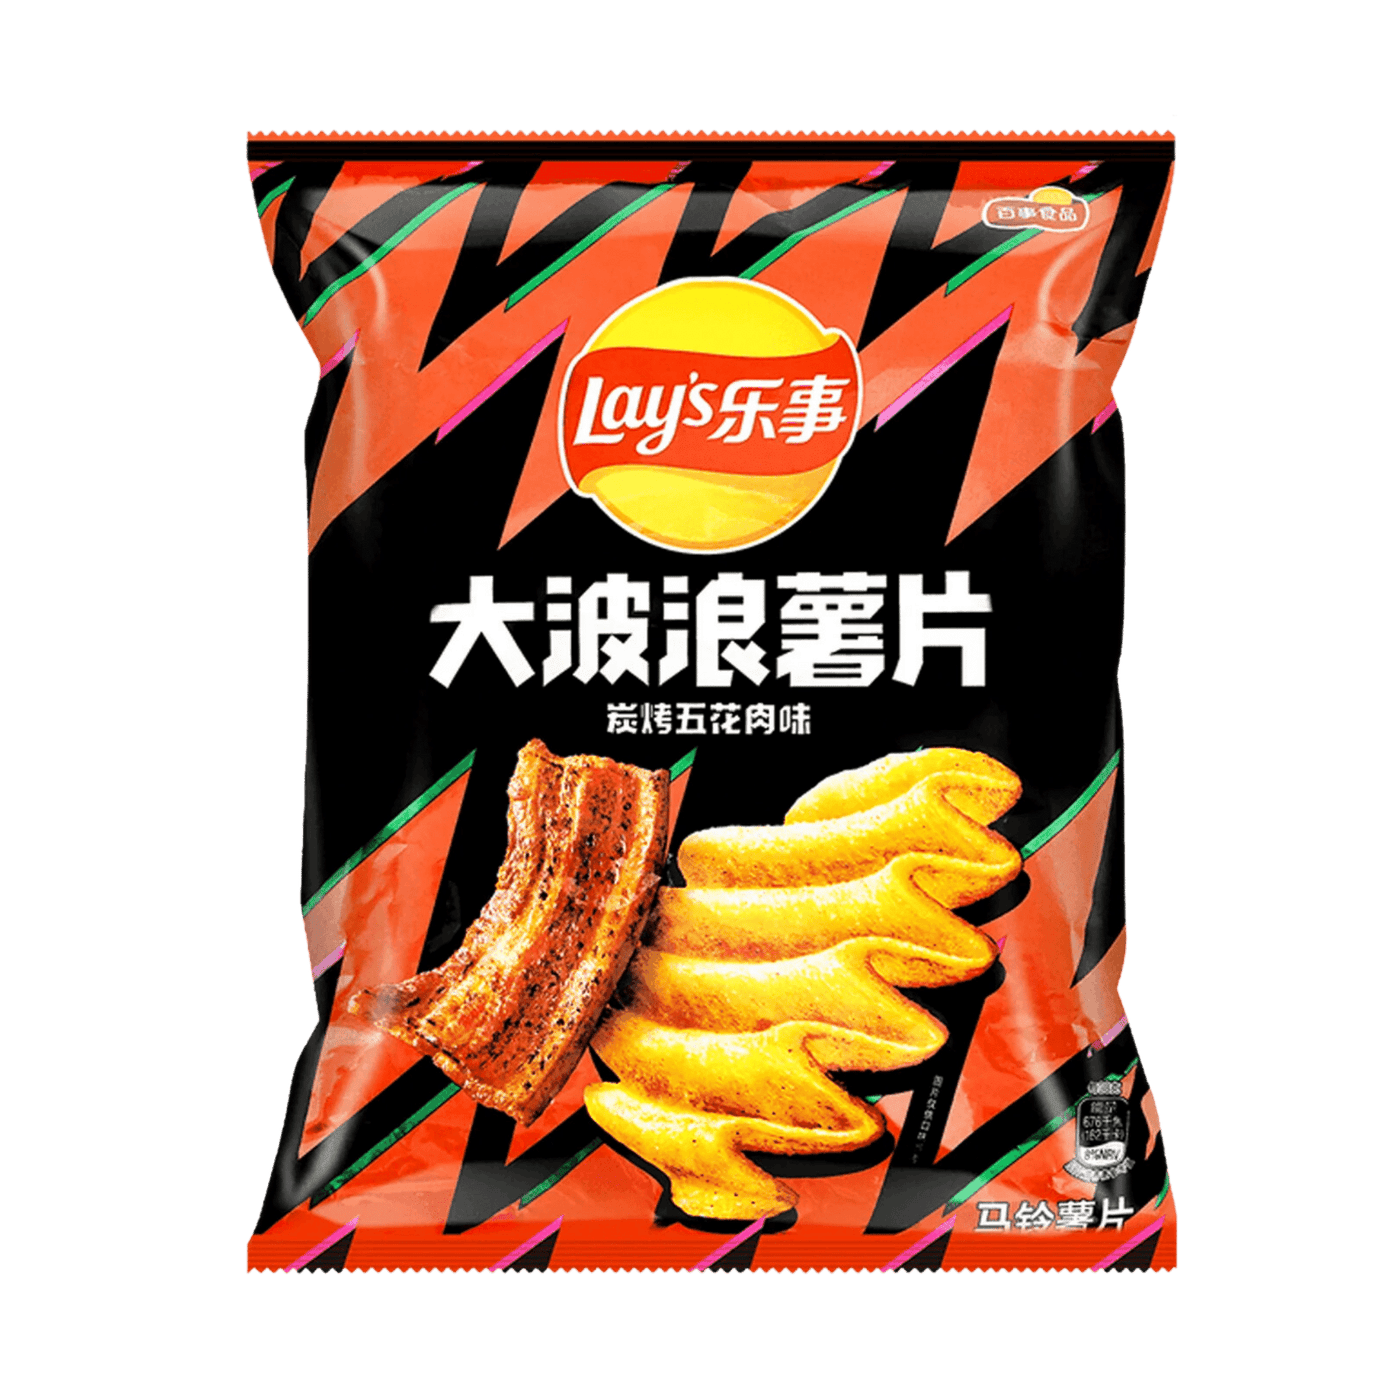 Lay's Wavy Lobster with Golden Salted Egg Sauce - Taiwan